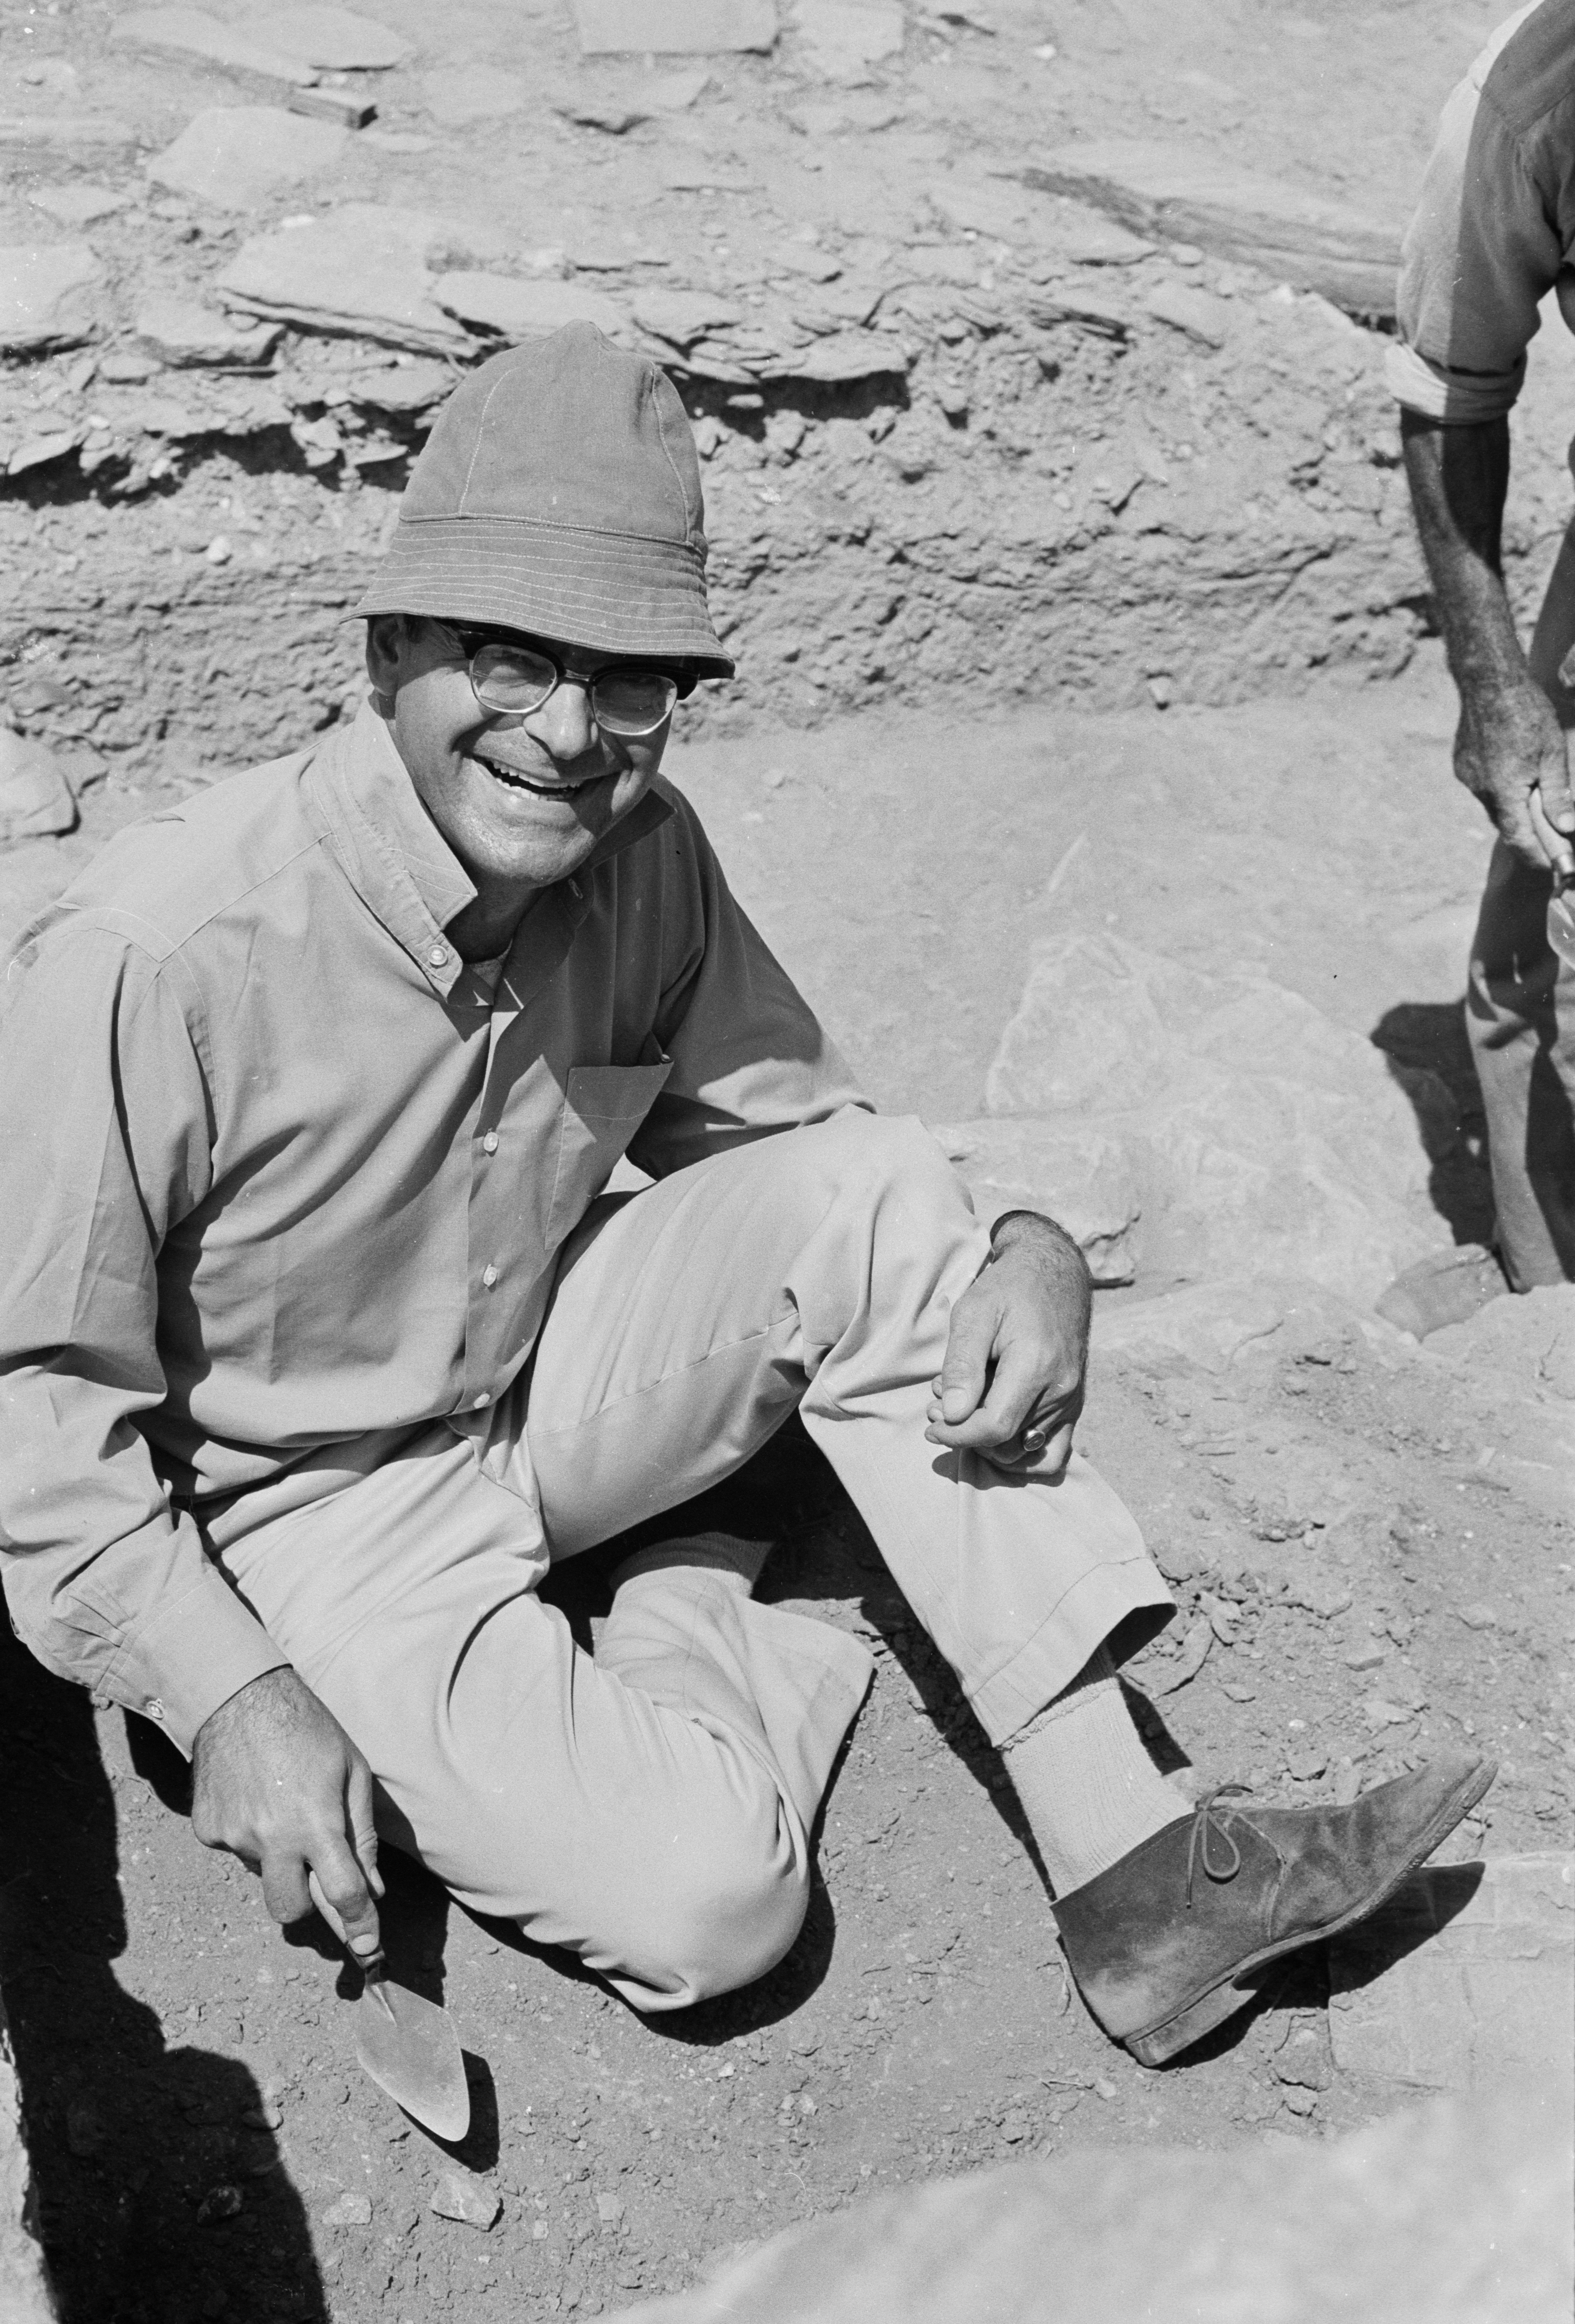 MUST-USE-Professor-Cambitoglou-excavating-in-Zagora-Andros-1971.